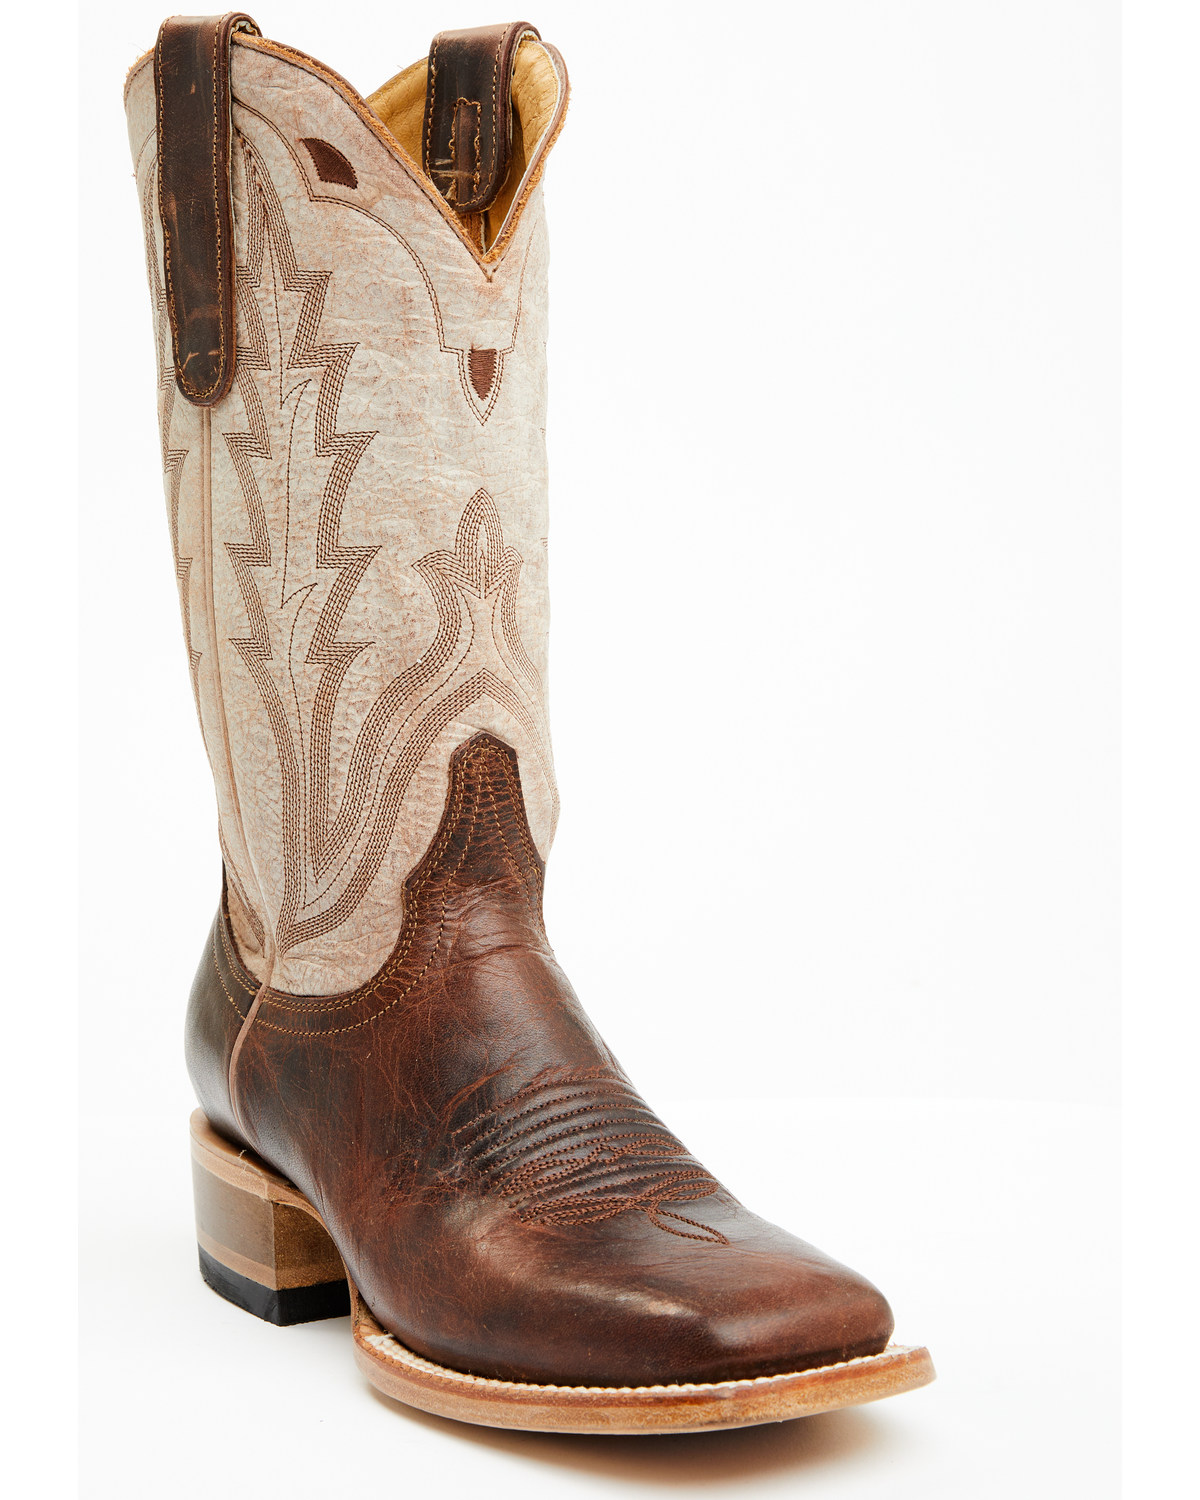 Idyllwind Women's Rodeo Western Performance Boots - Broad Square Toe